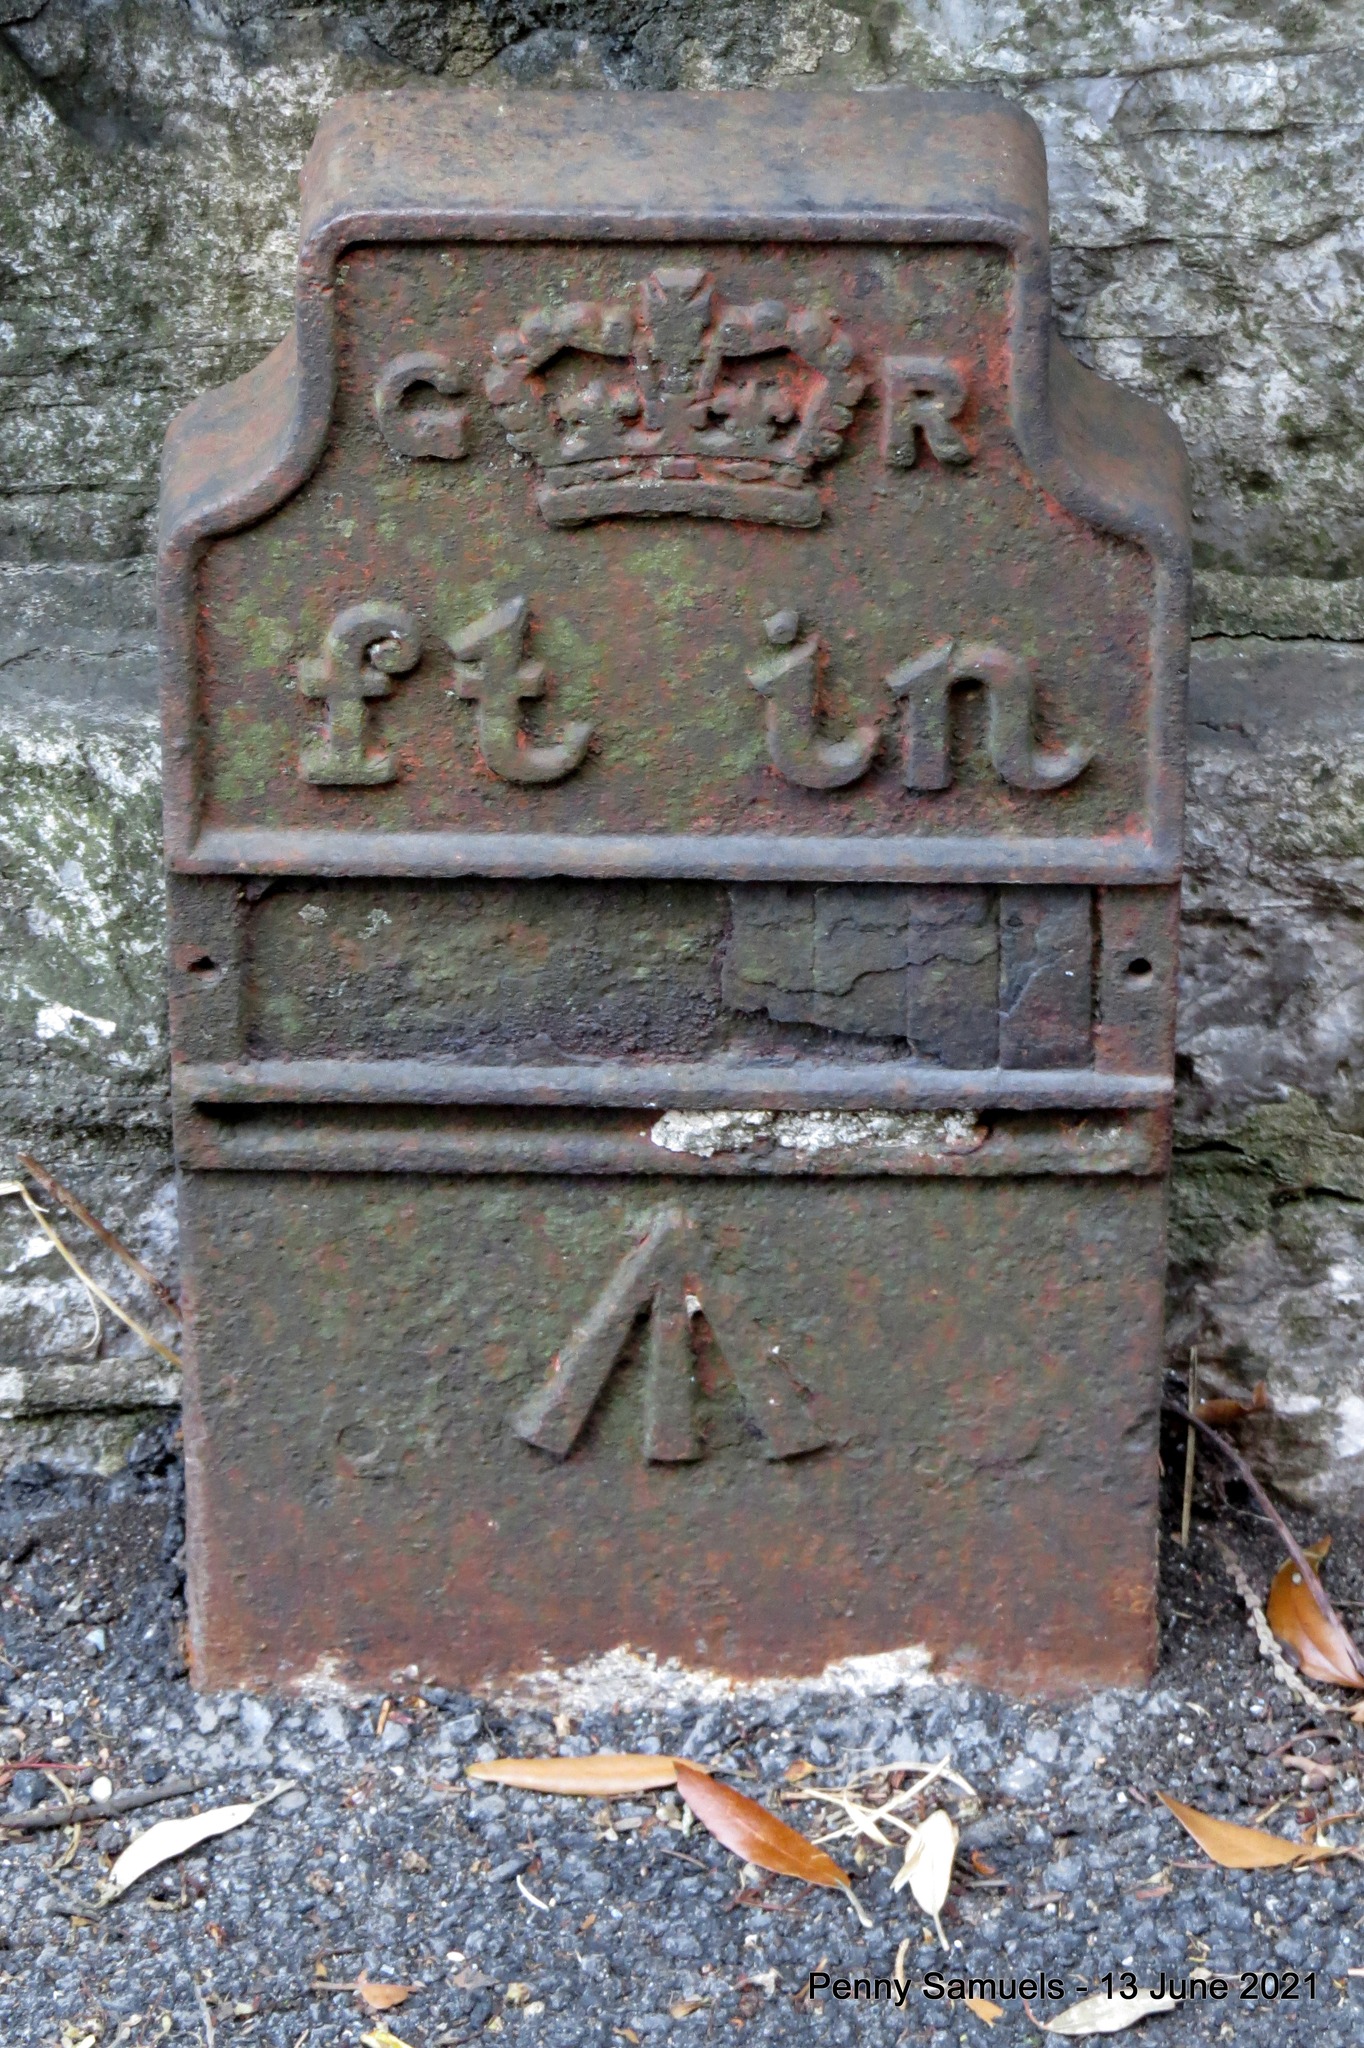 Telegraph cable marker post at 74 Mannamead Road, Plymouth by Penny Samuels 